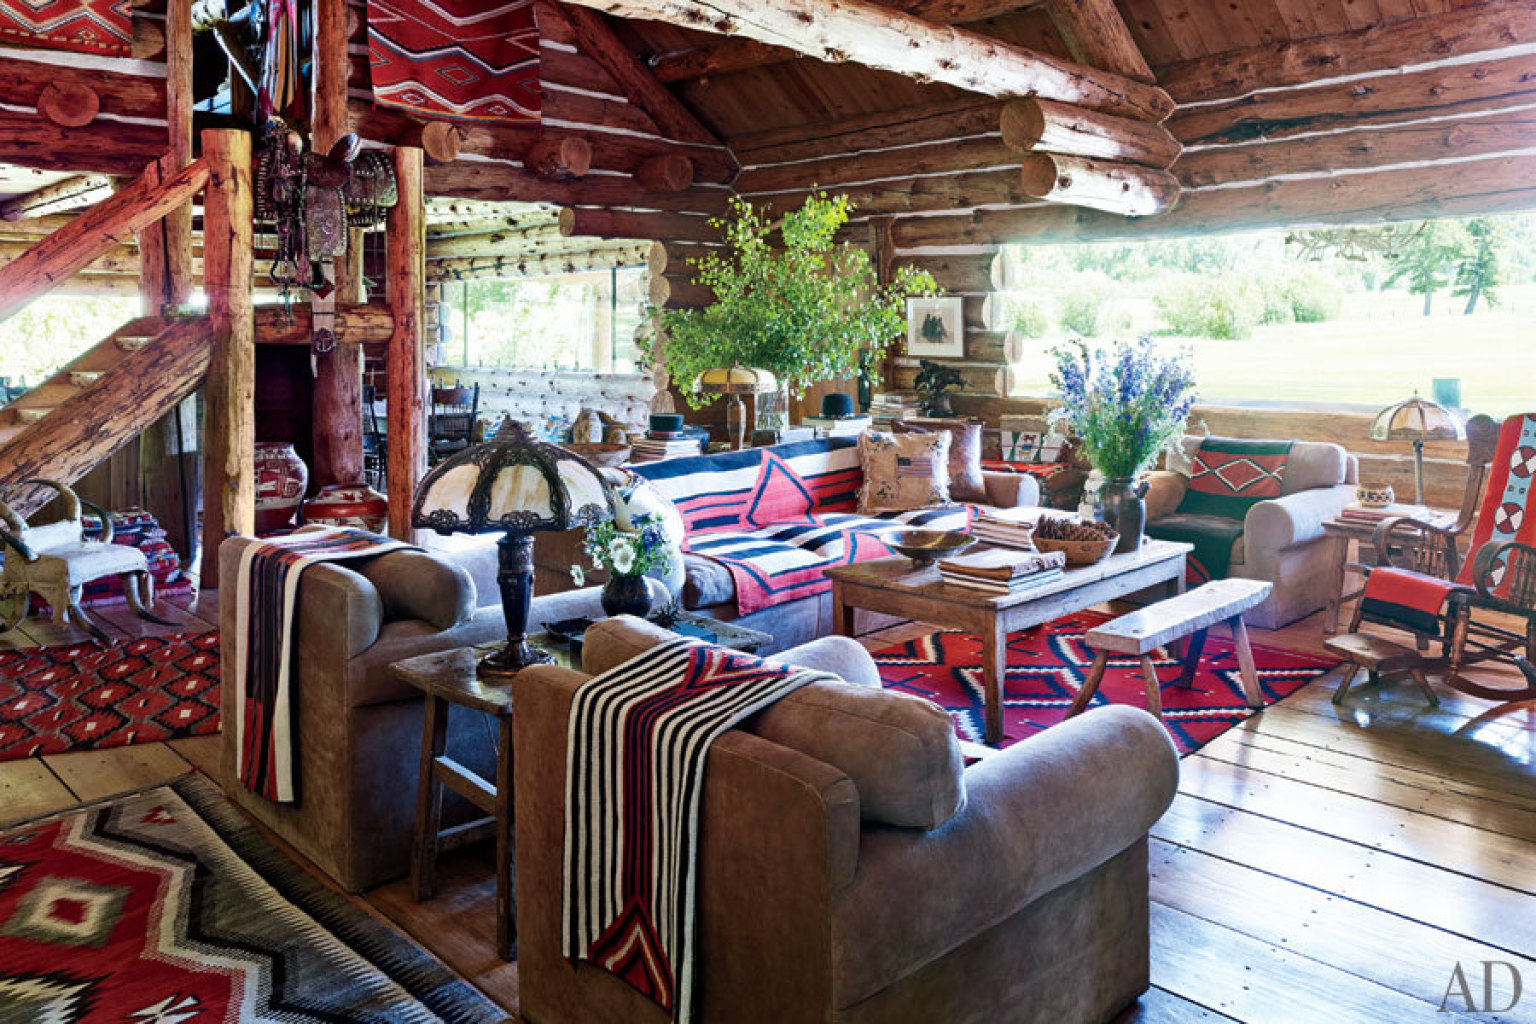 Ralph Lauren Shows Off His Amazing Homes In Architectural Digest's ...